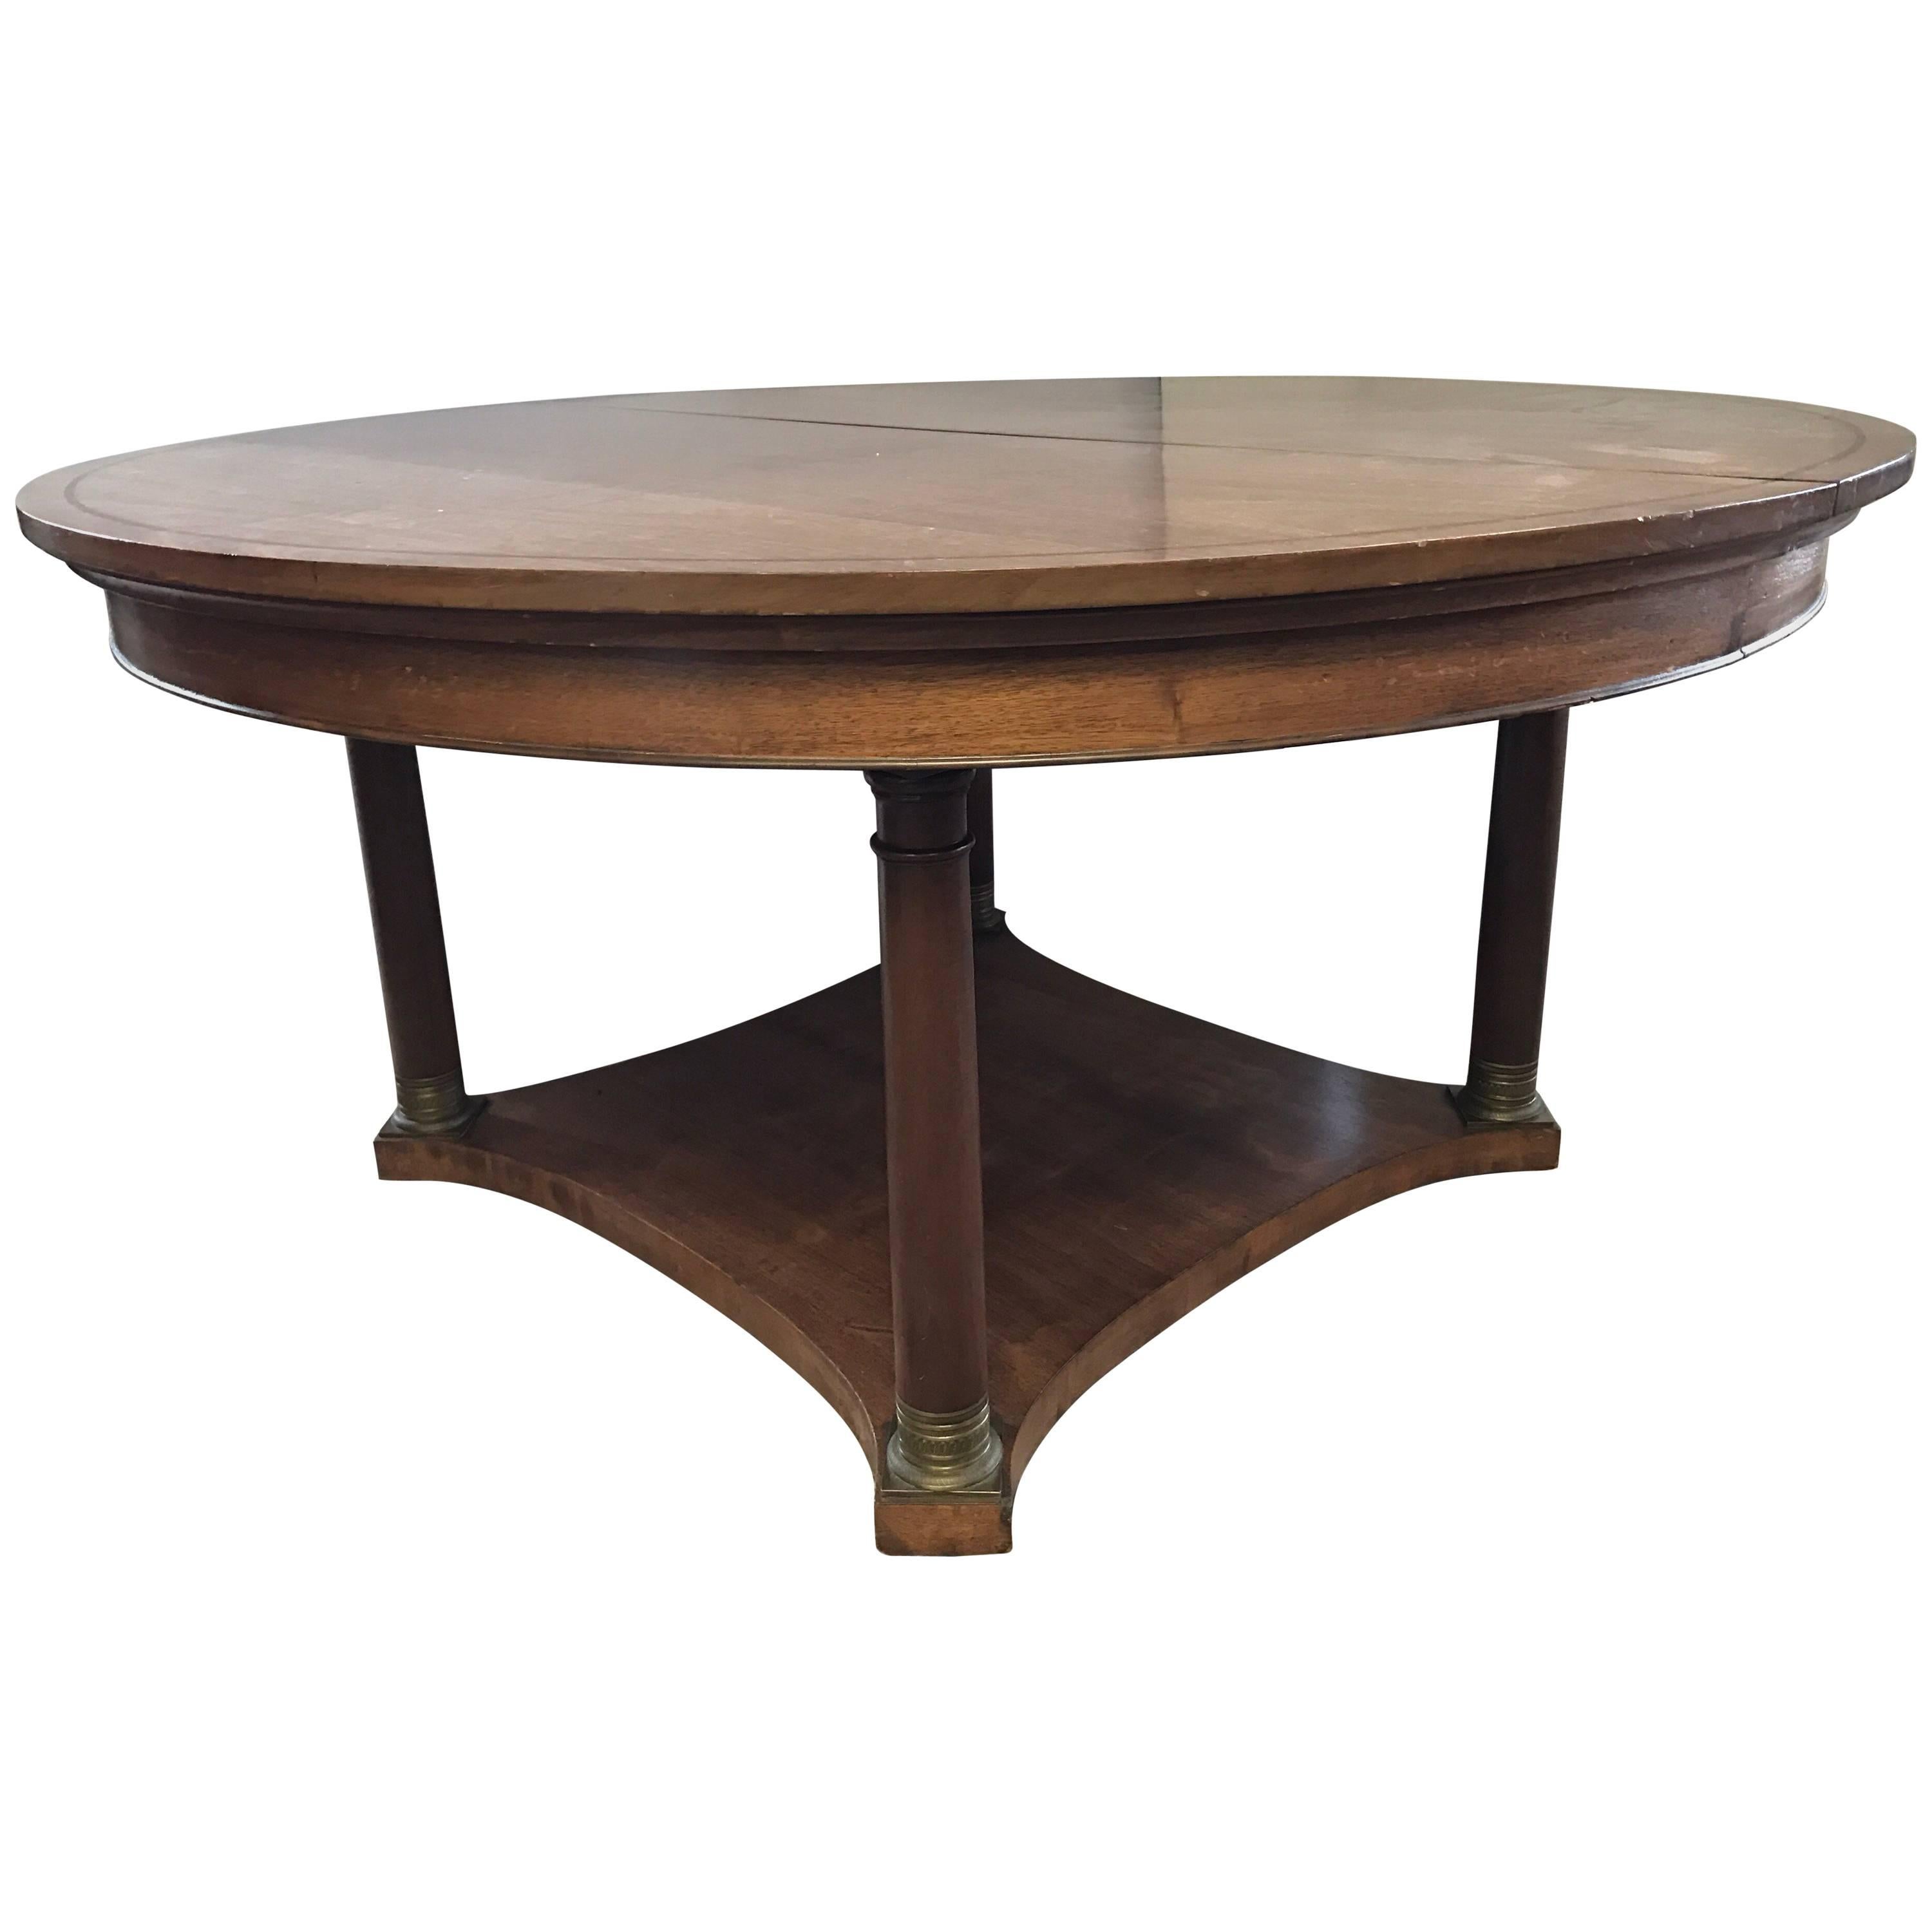 Neoclassical Round Extension Walnut Dining Table Potthast Brothers